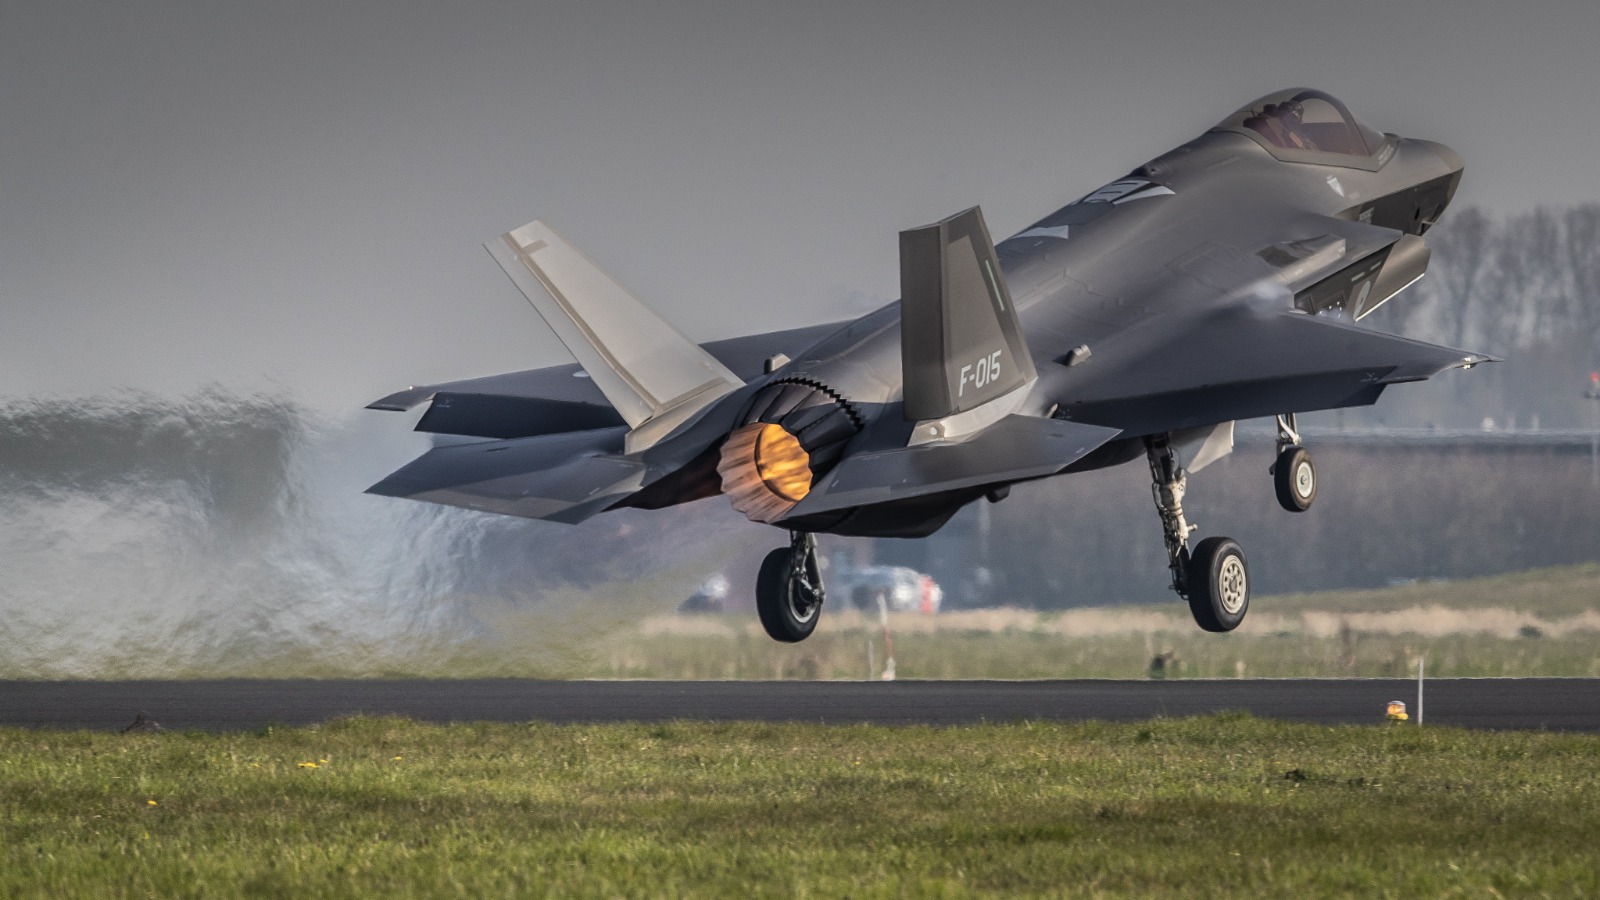 Switzerland signed a €6.035 billion contract to buy F-35A Lightning II 5th-generation fighters